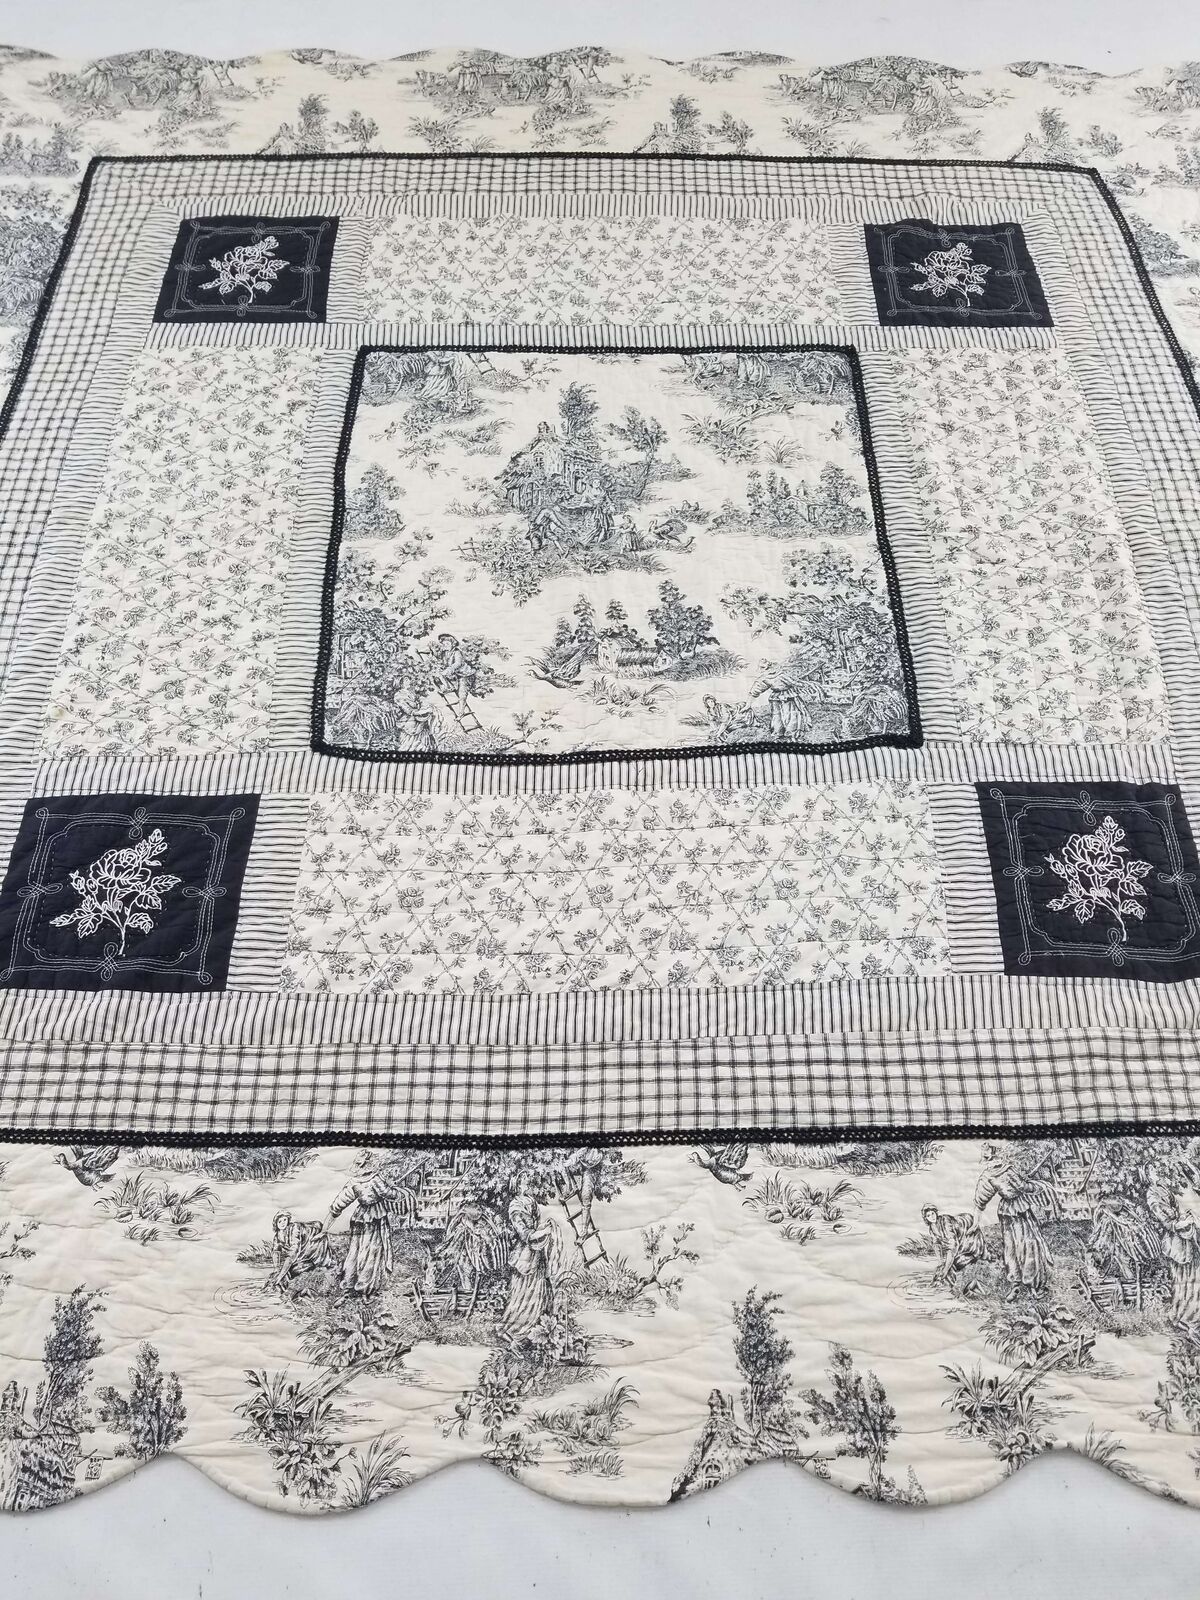 Beautiful Vintage Toile Gray French Country Garden  Quilt 89x85 inch